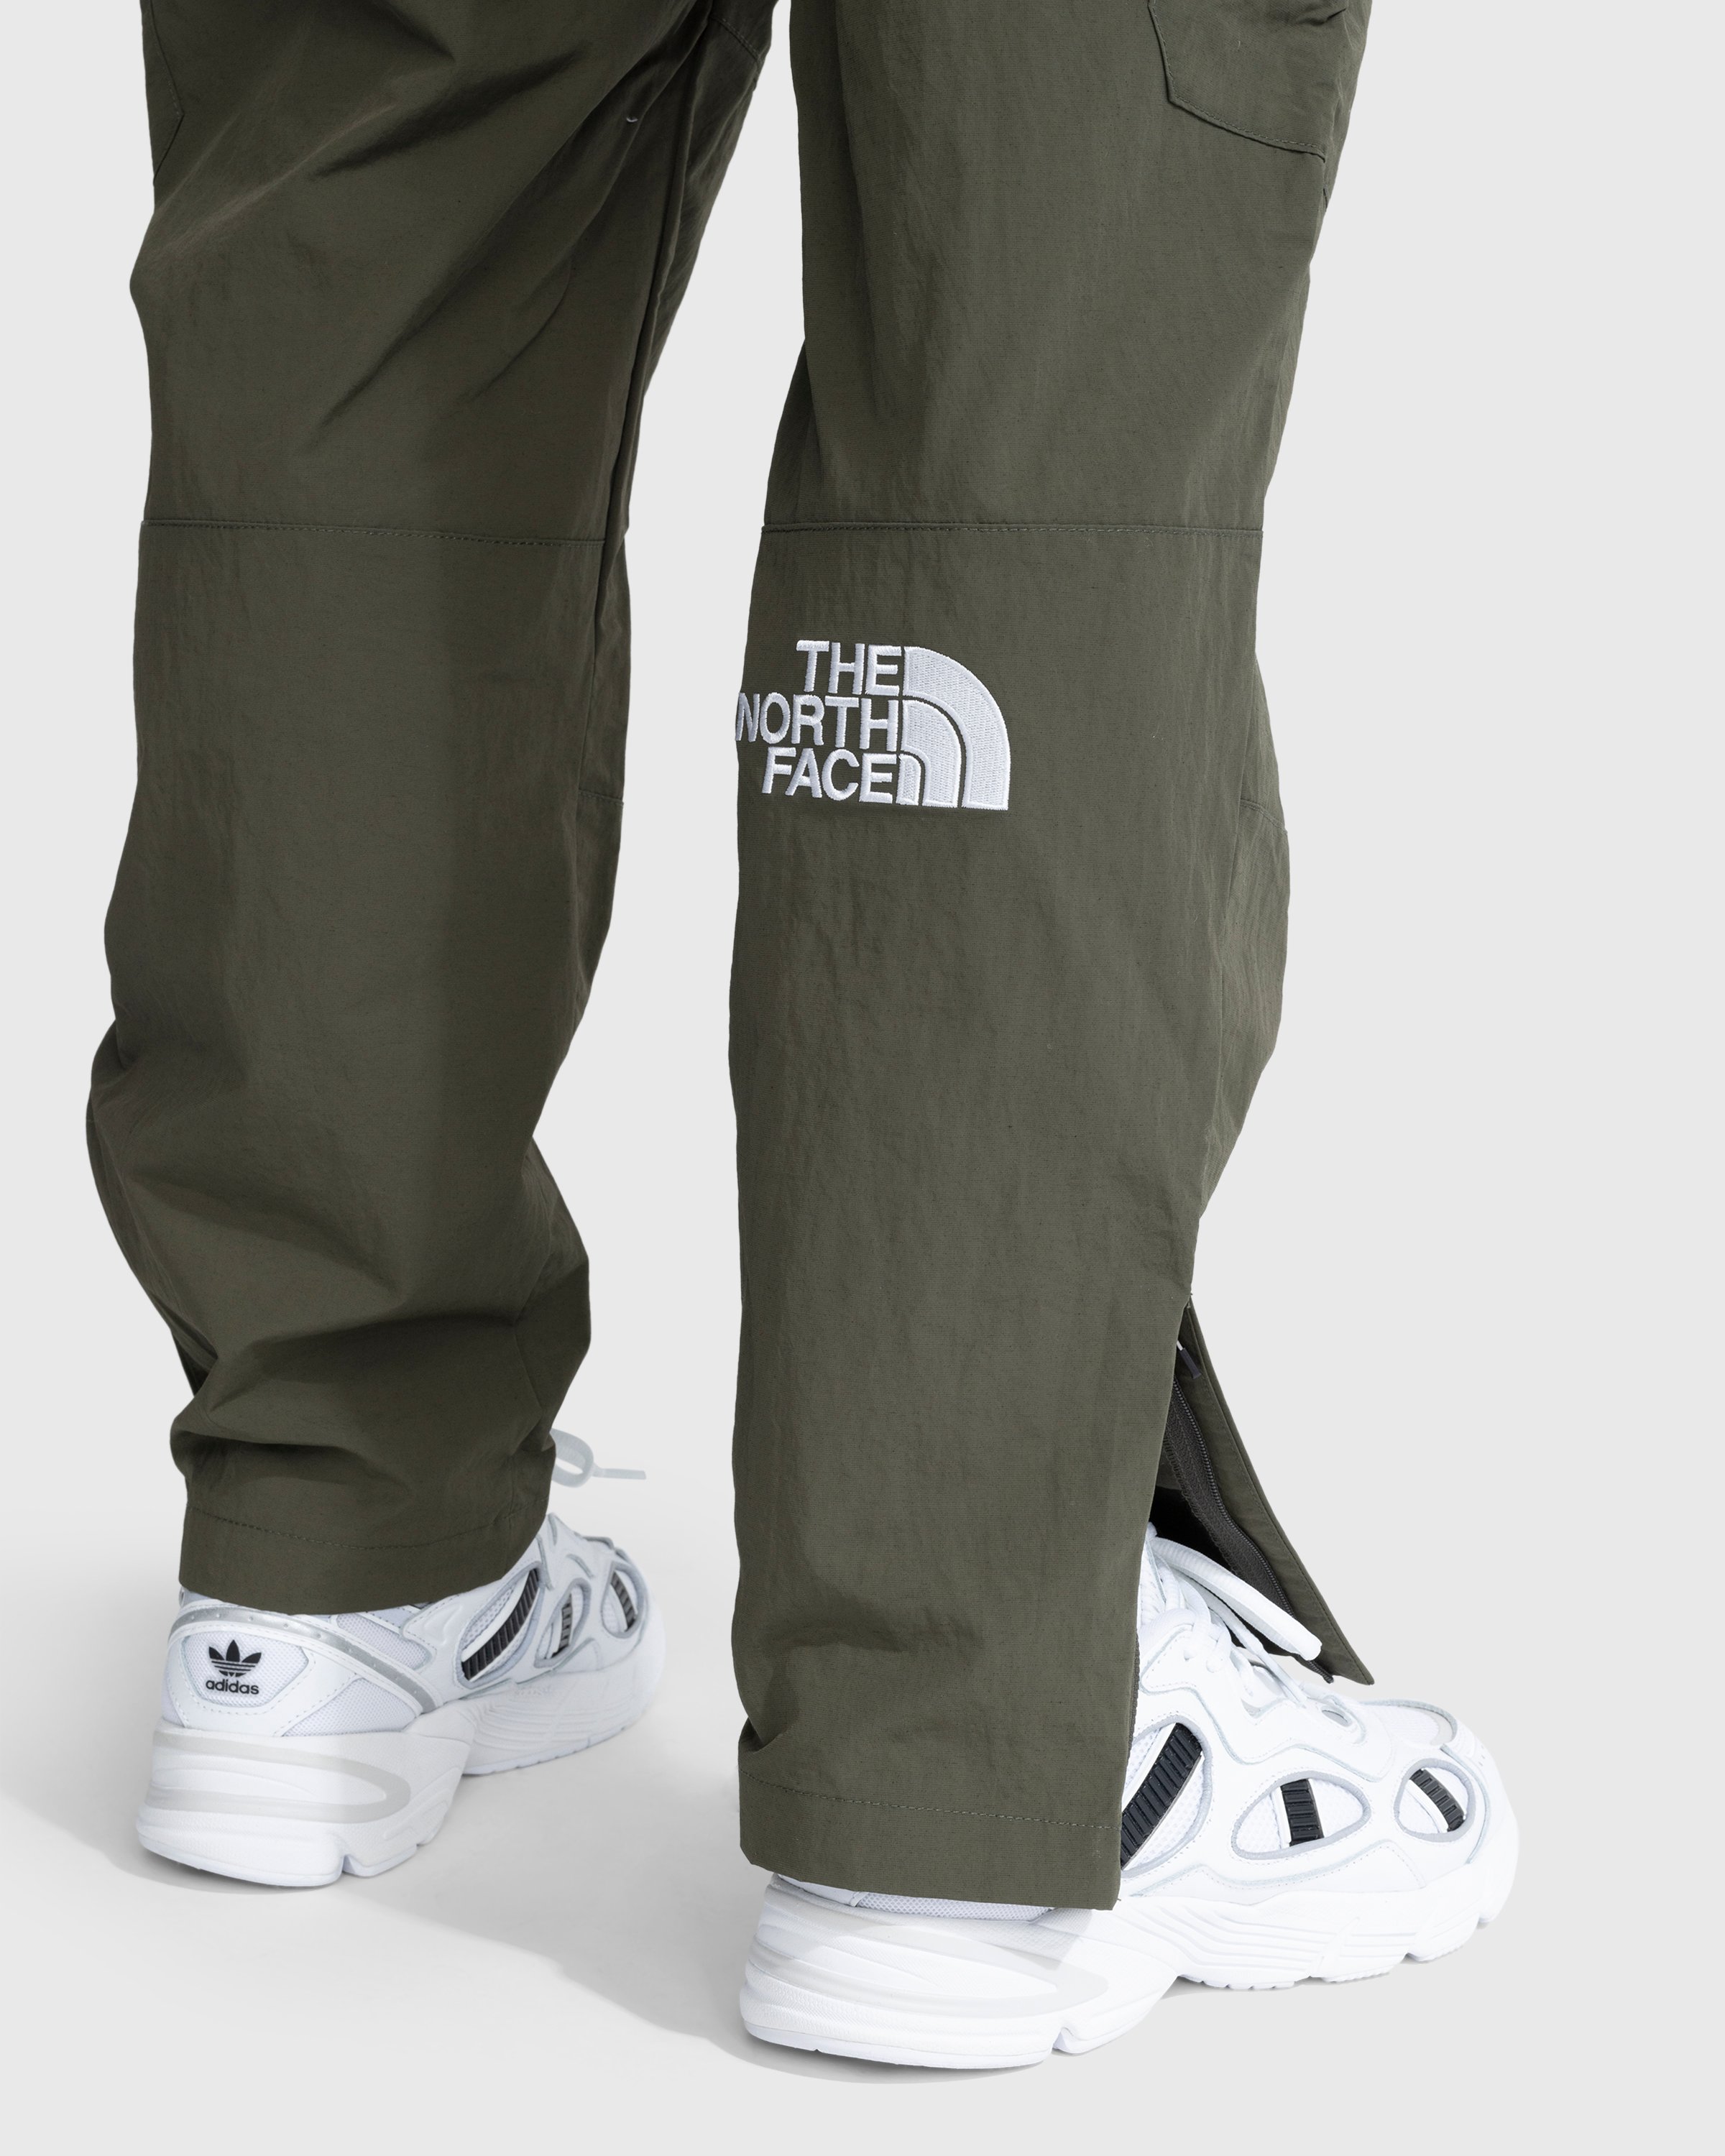 The North Face - ‘78 Low-Fi Hi-Tek Cargo Pant New Taupe Green - Clothing - Green - Image 5